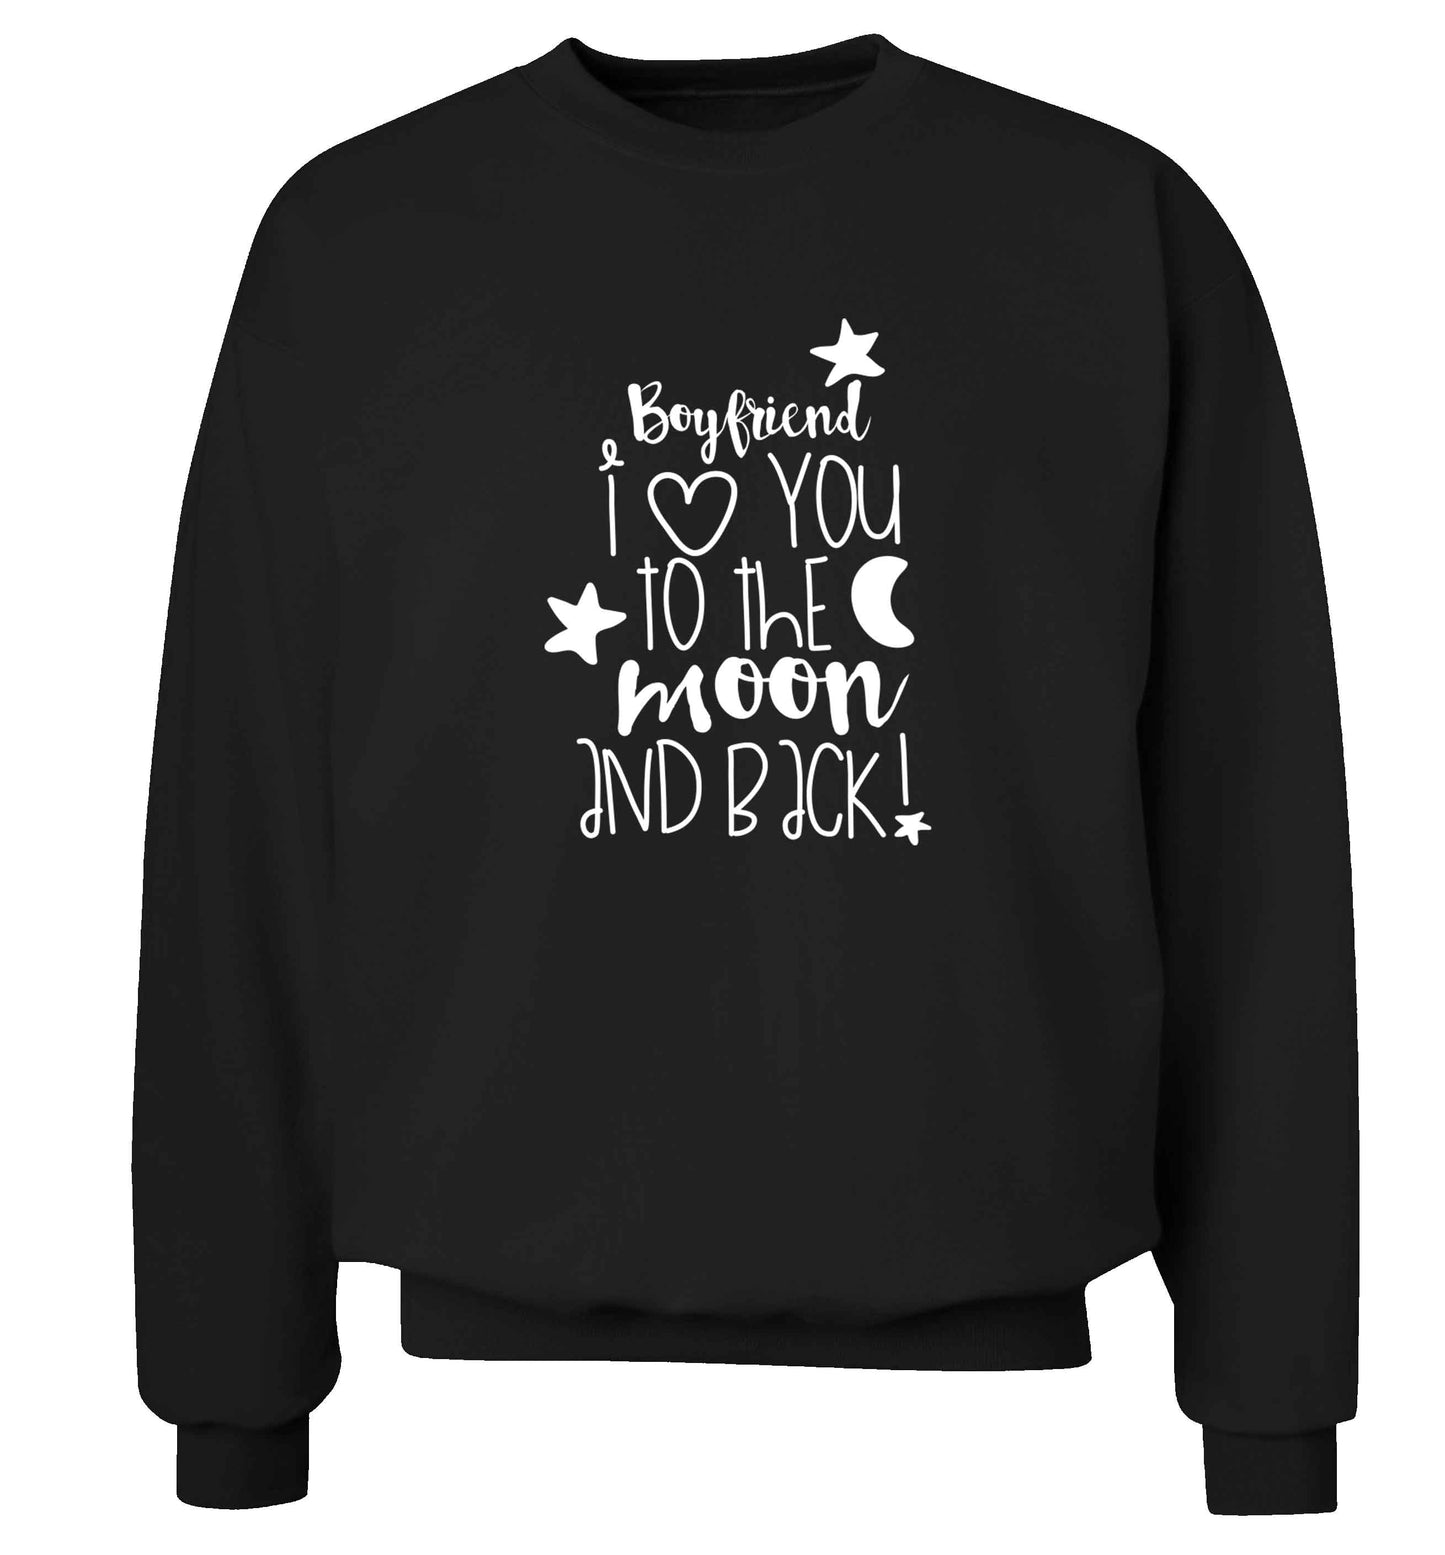 Boyfriend I love you to the moon and back adult's unisex black sweater 2XL